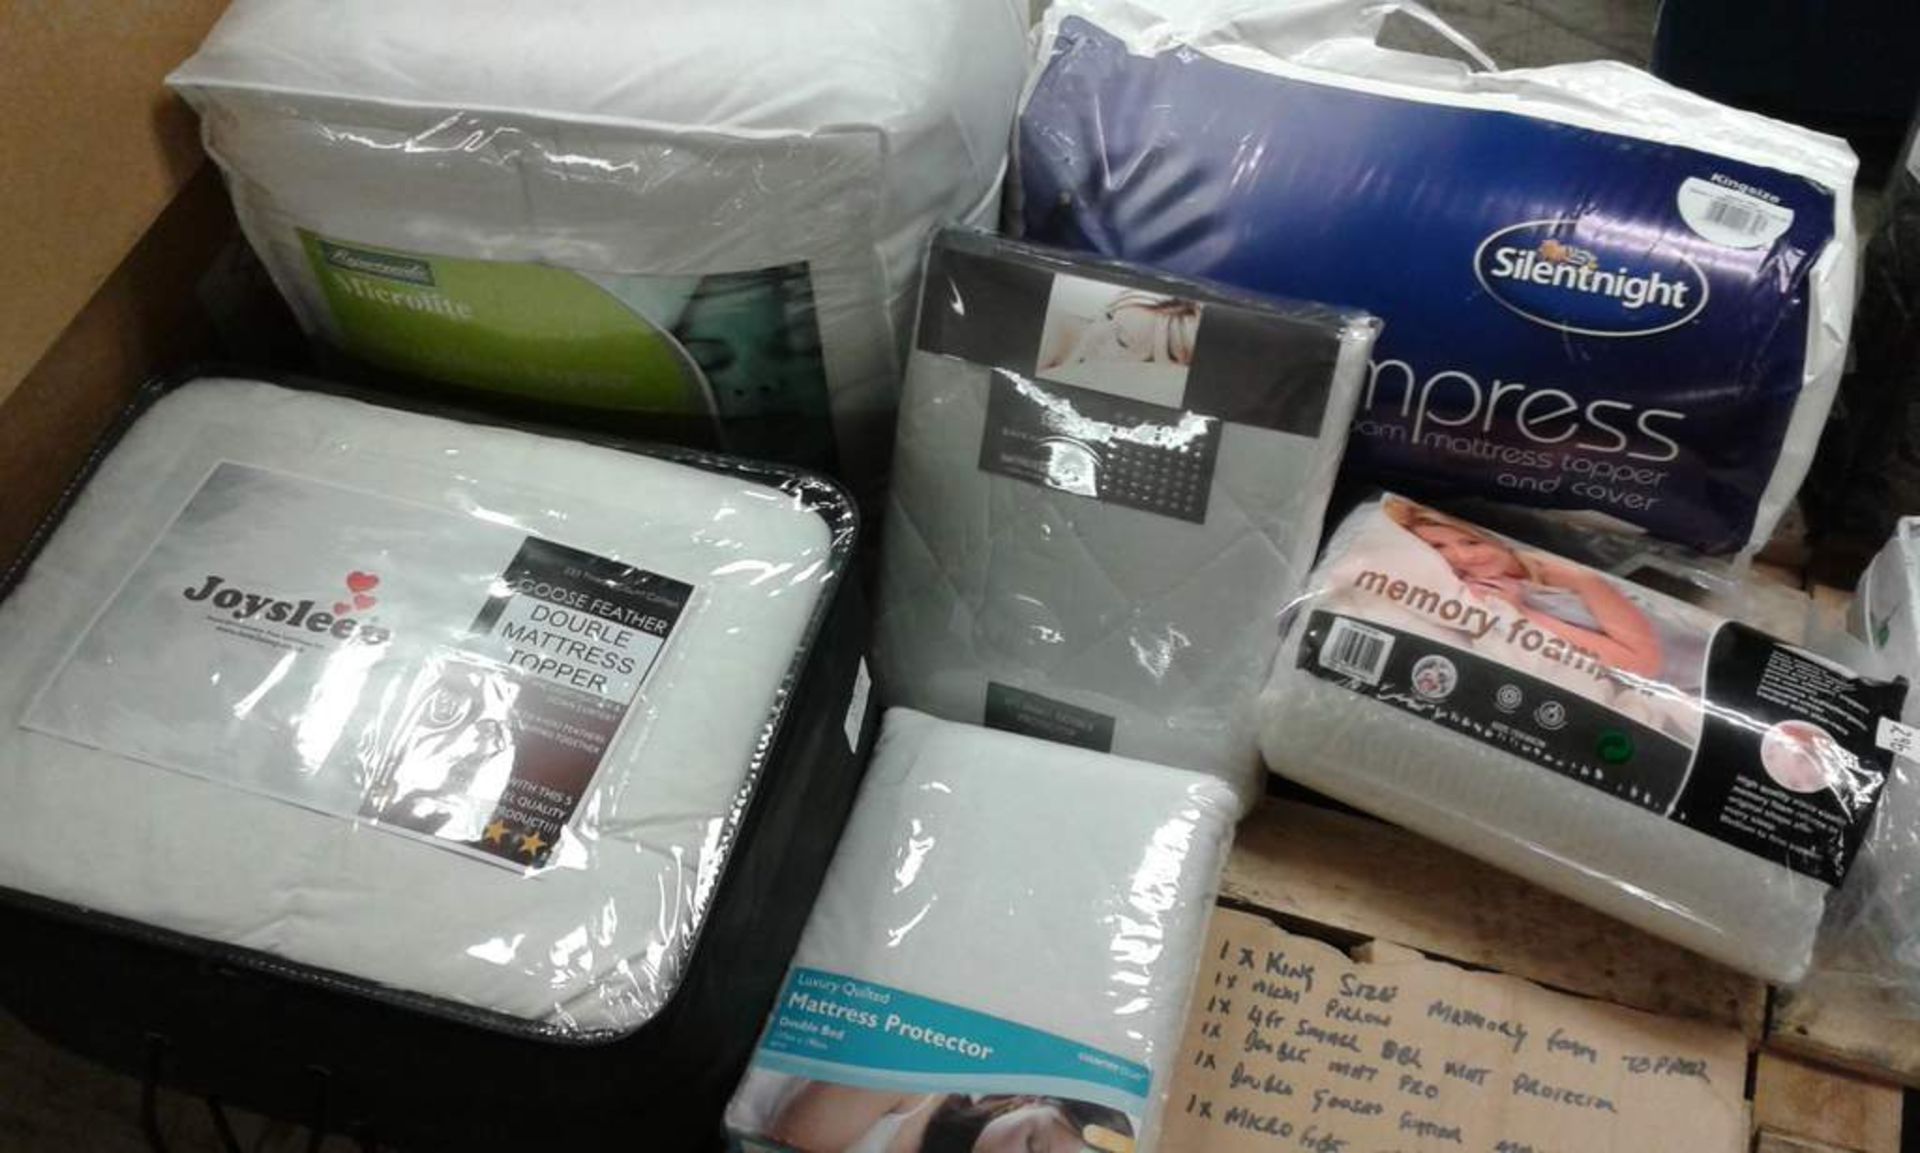 Assorted Mattress Toppers Varied Sizes - Memory Foam Pillow - 2x Mattress Protector - Image 2 of 2